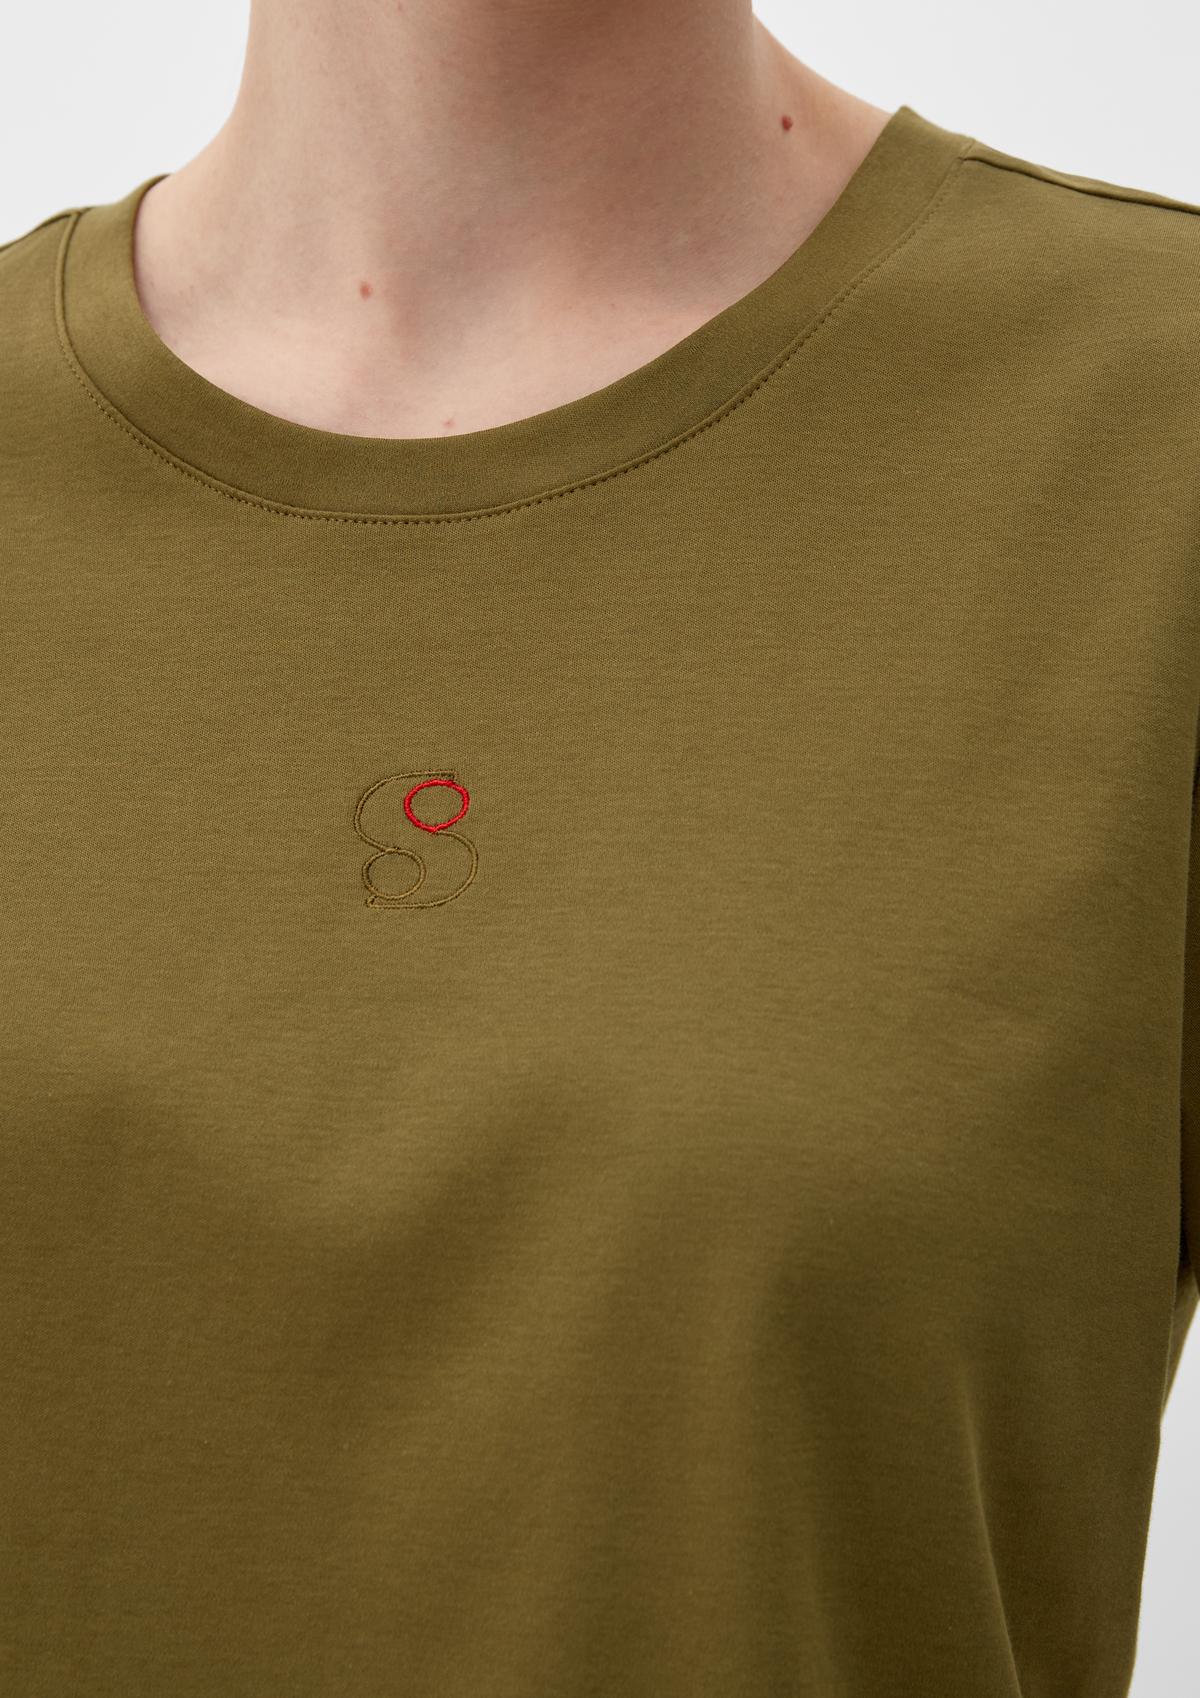 s.Oliver T-shirt with logo embroidery